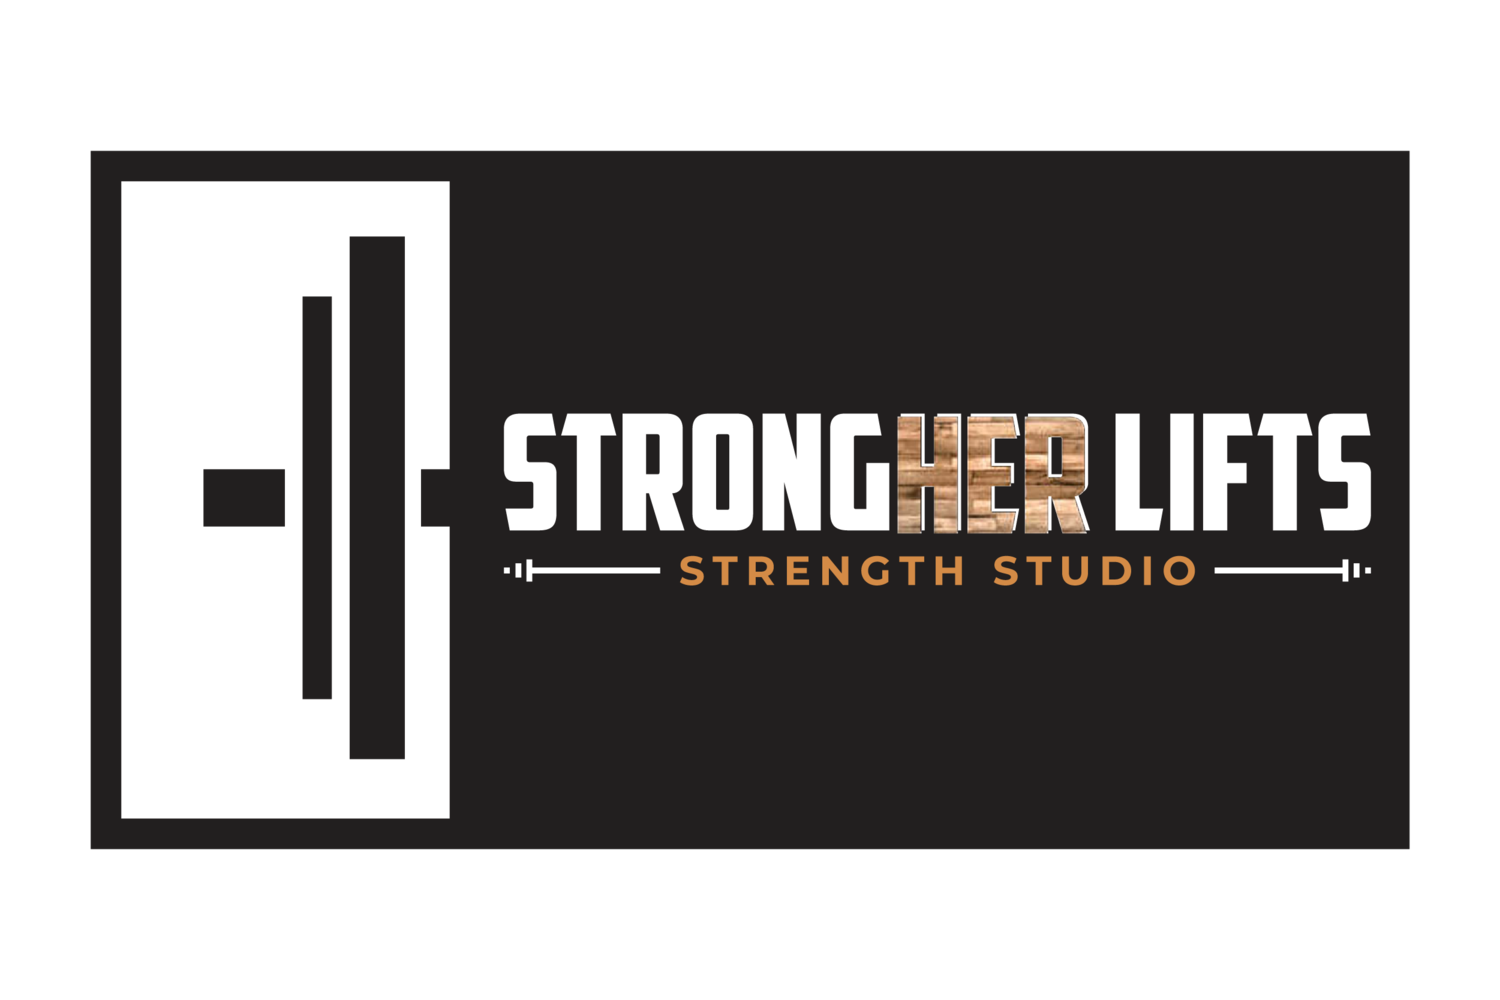 StrongHer Lifts 